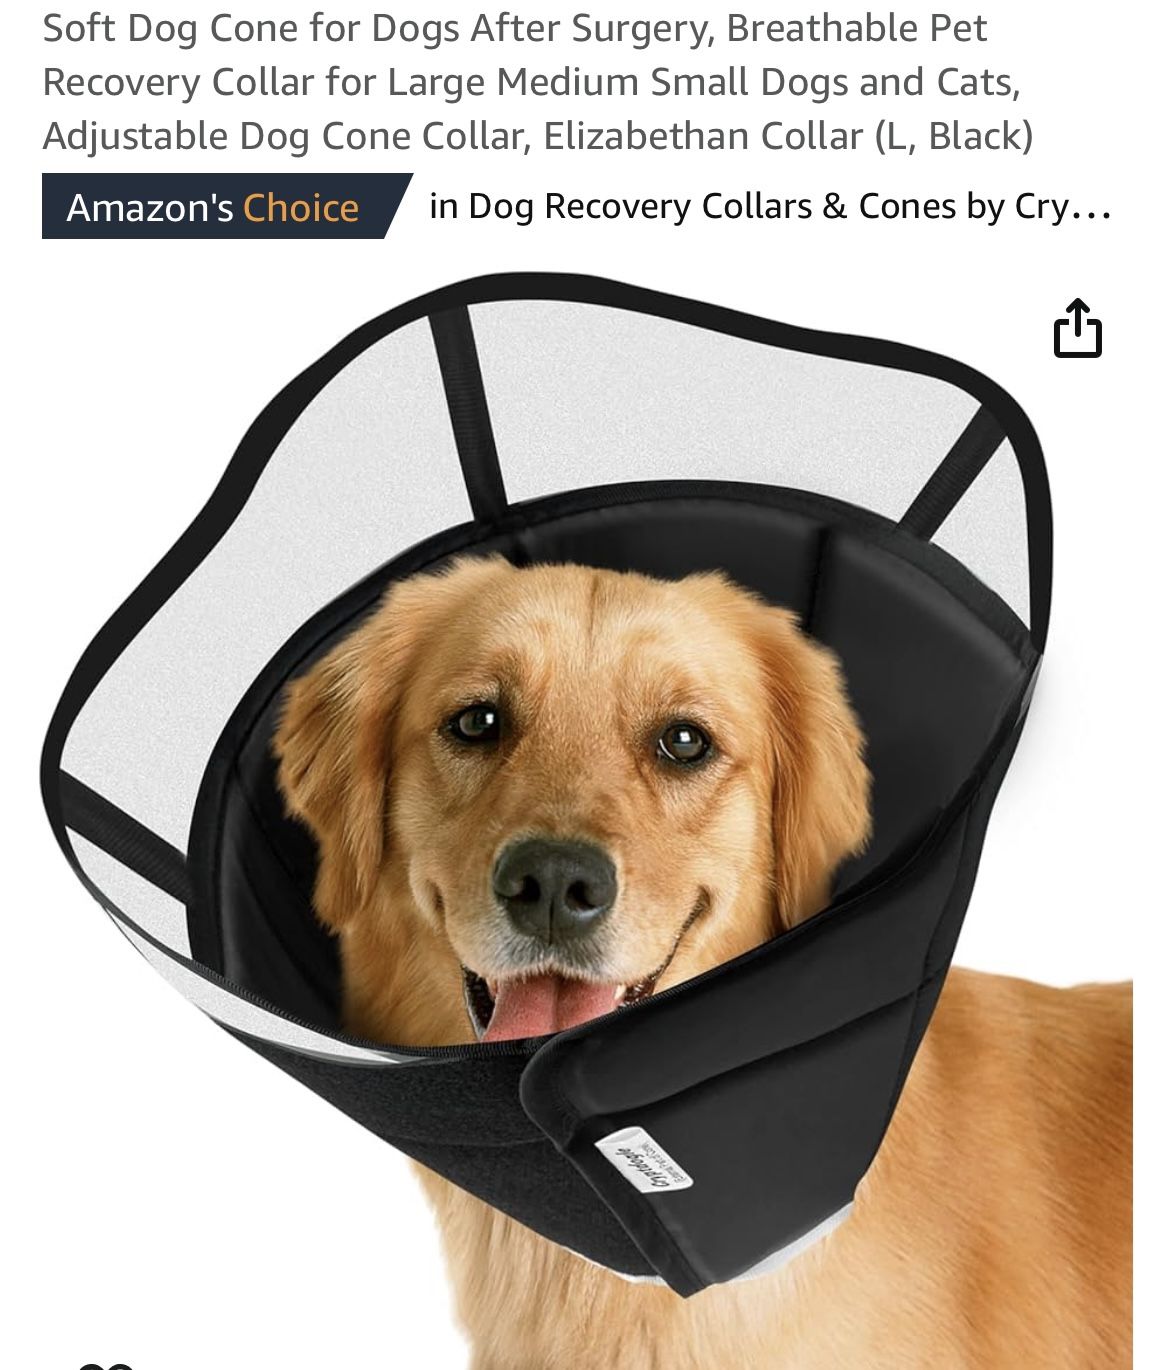 Soft Dog Cone for Dogs After Surgery, Breathable Pet Recovery Collar for Large